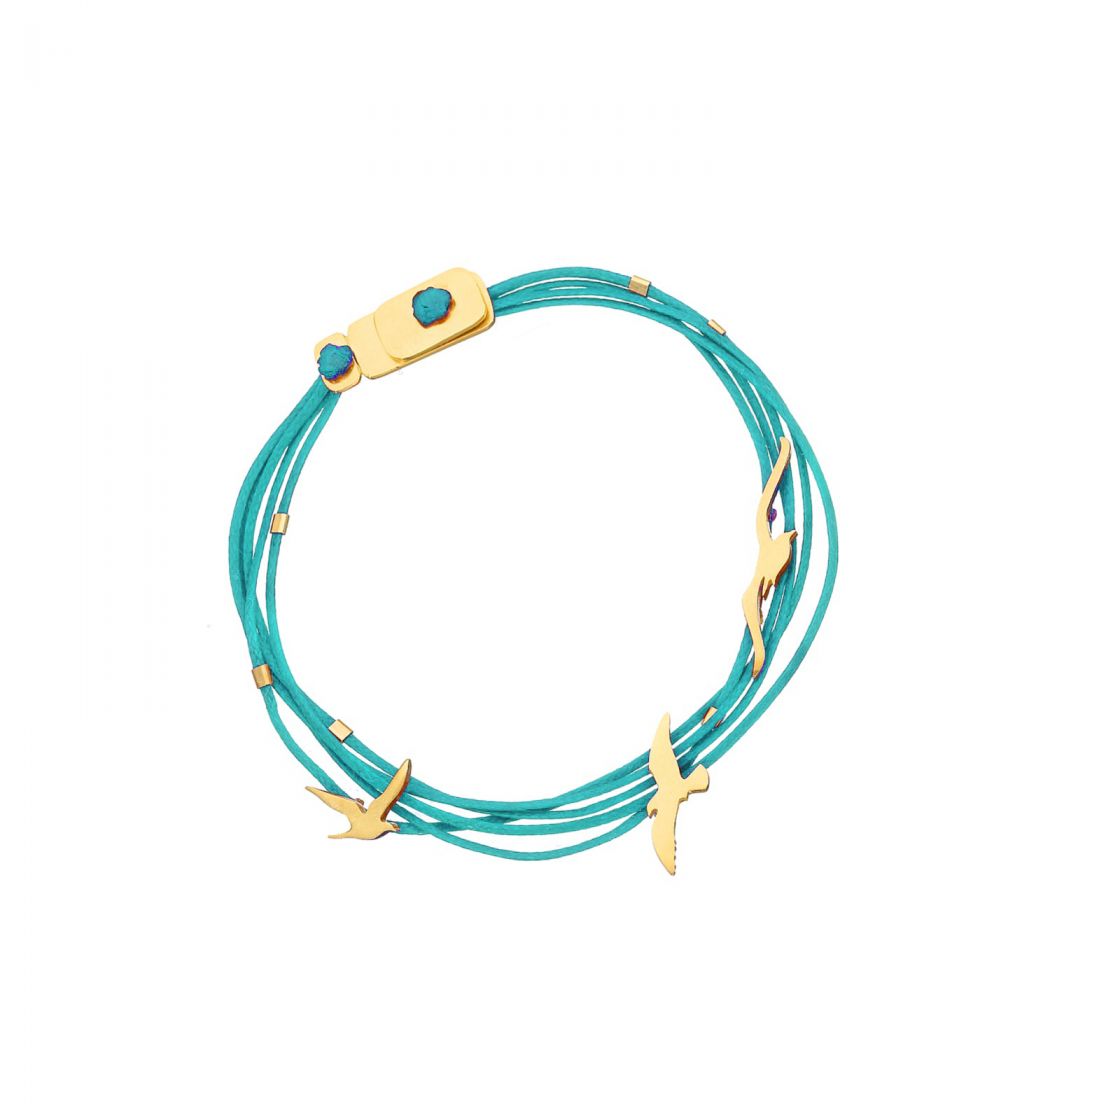 Gold seagulls tied to a multi strand of teal cords